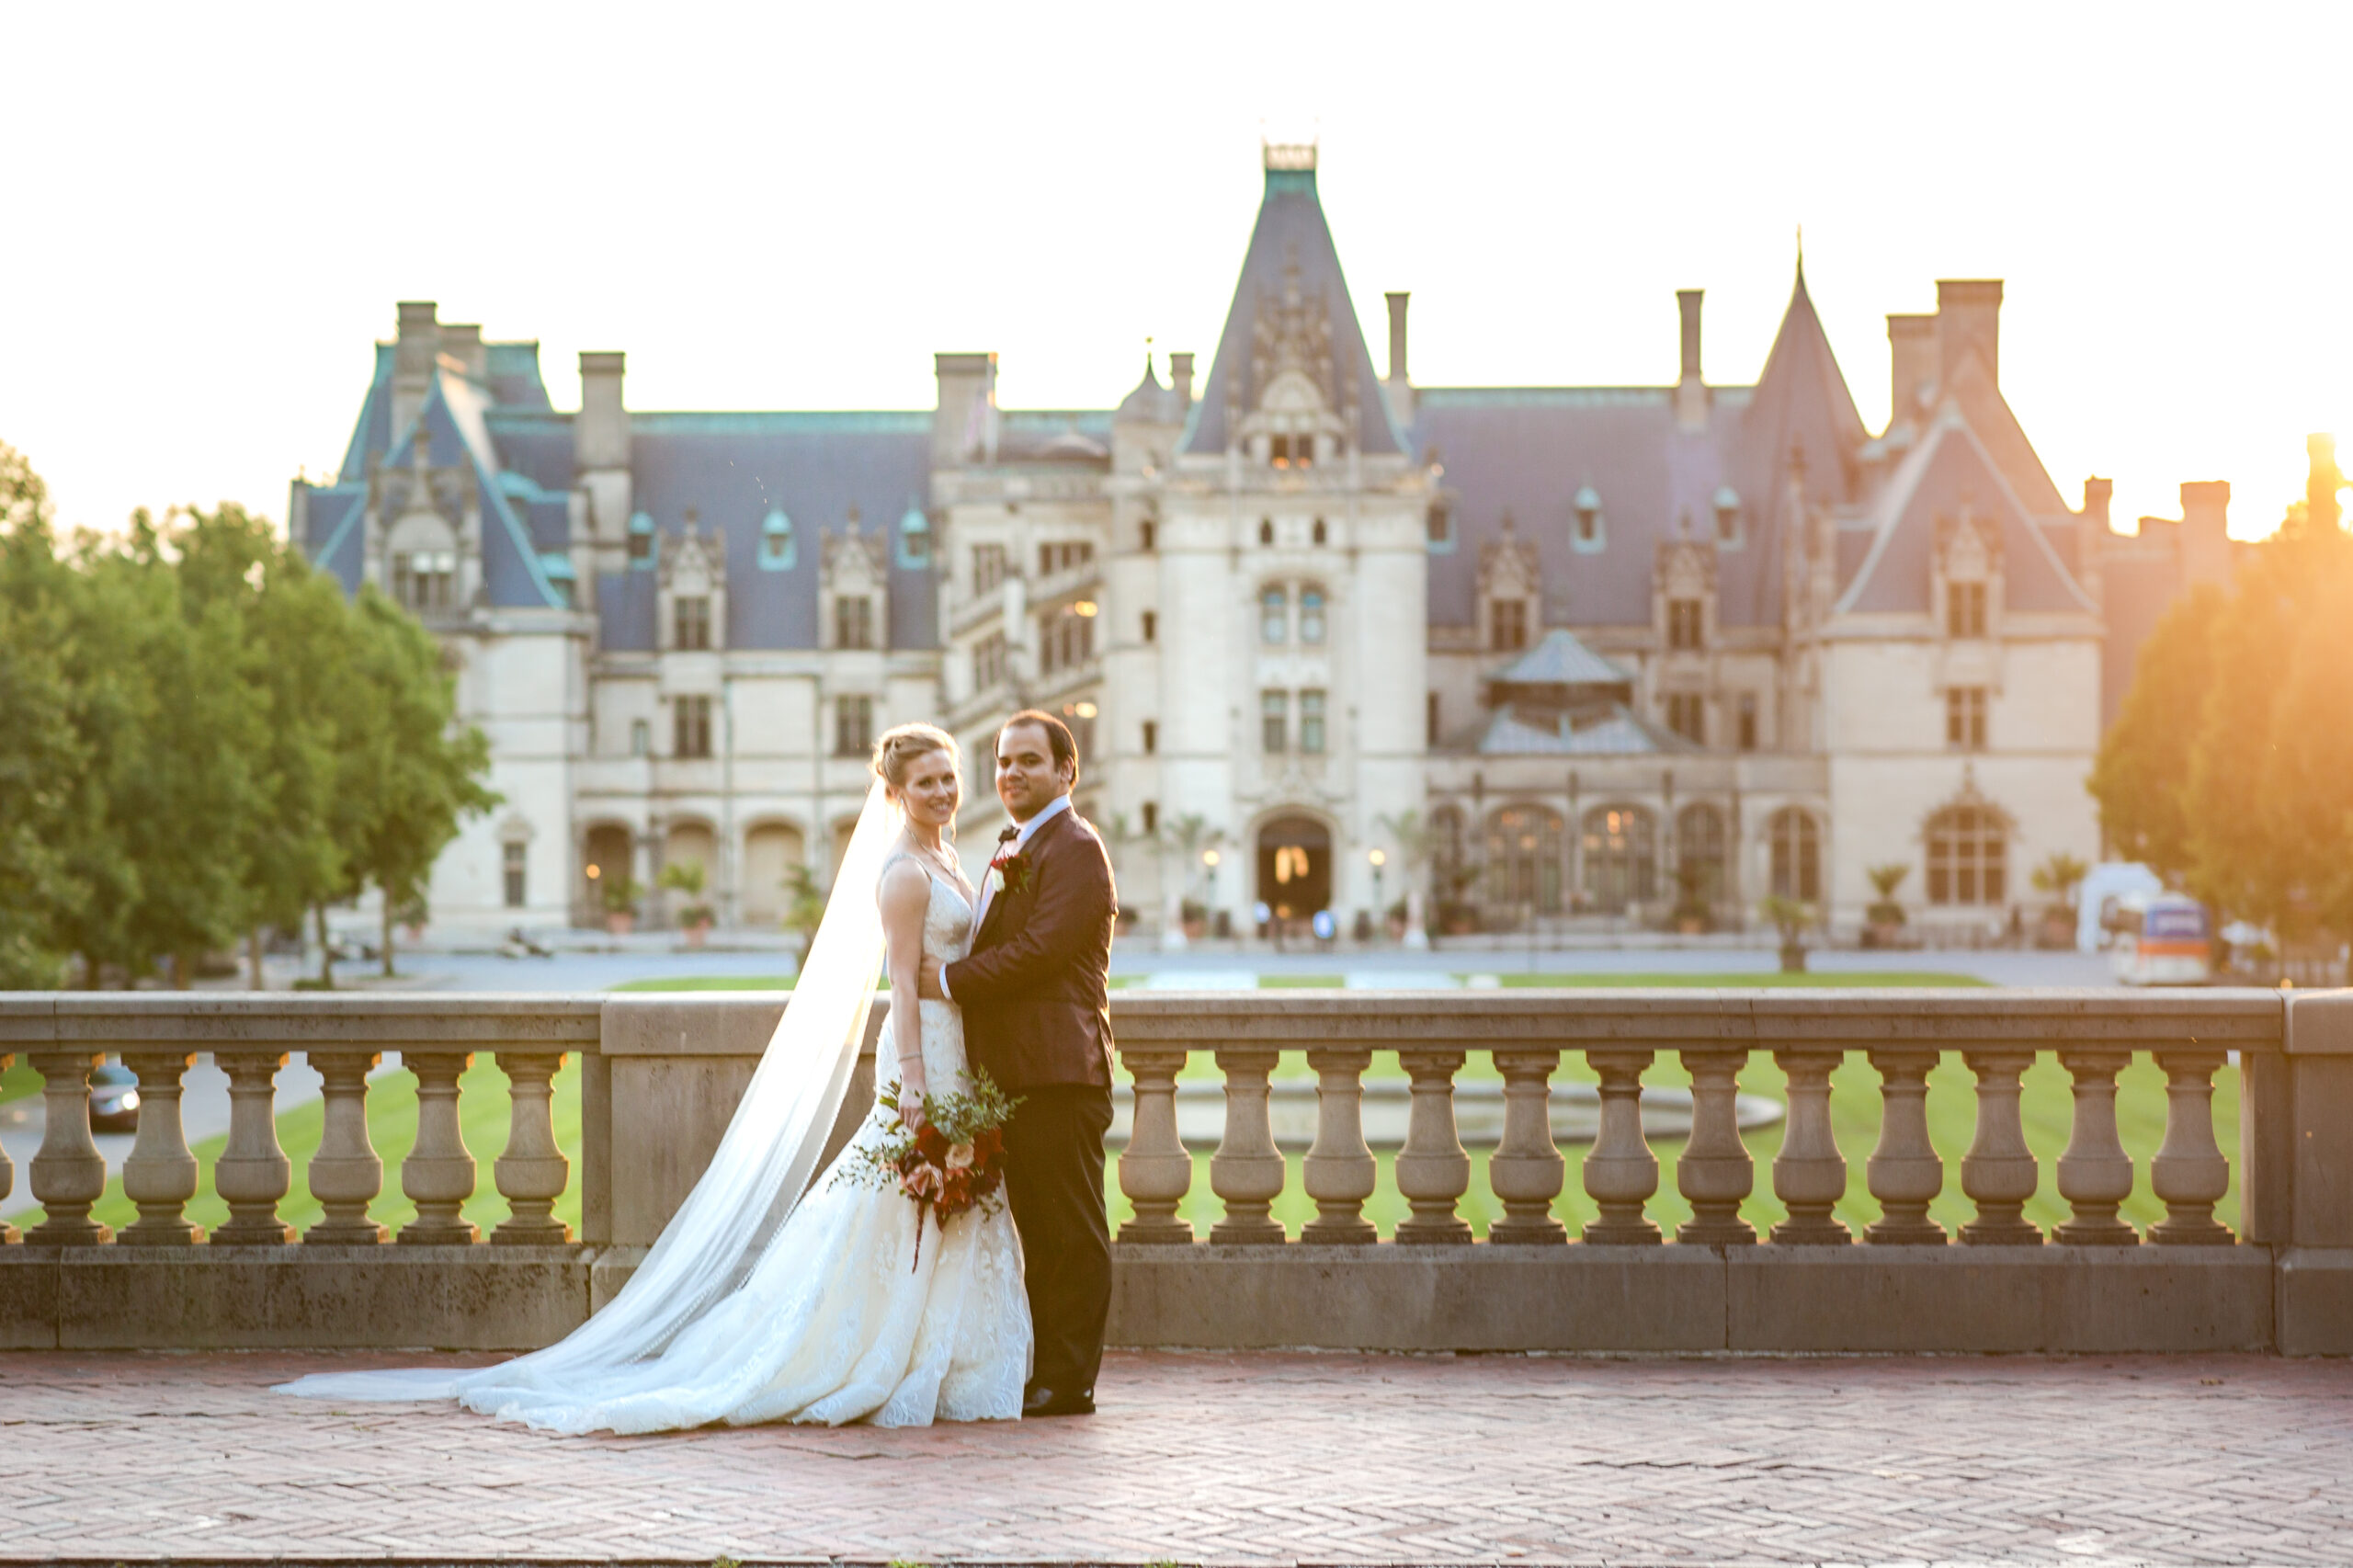 Just married couple posing in front of the Biltmore Estate house after their wedding 